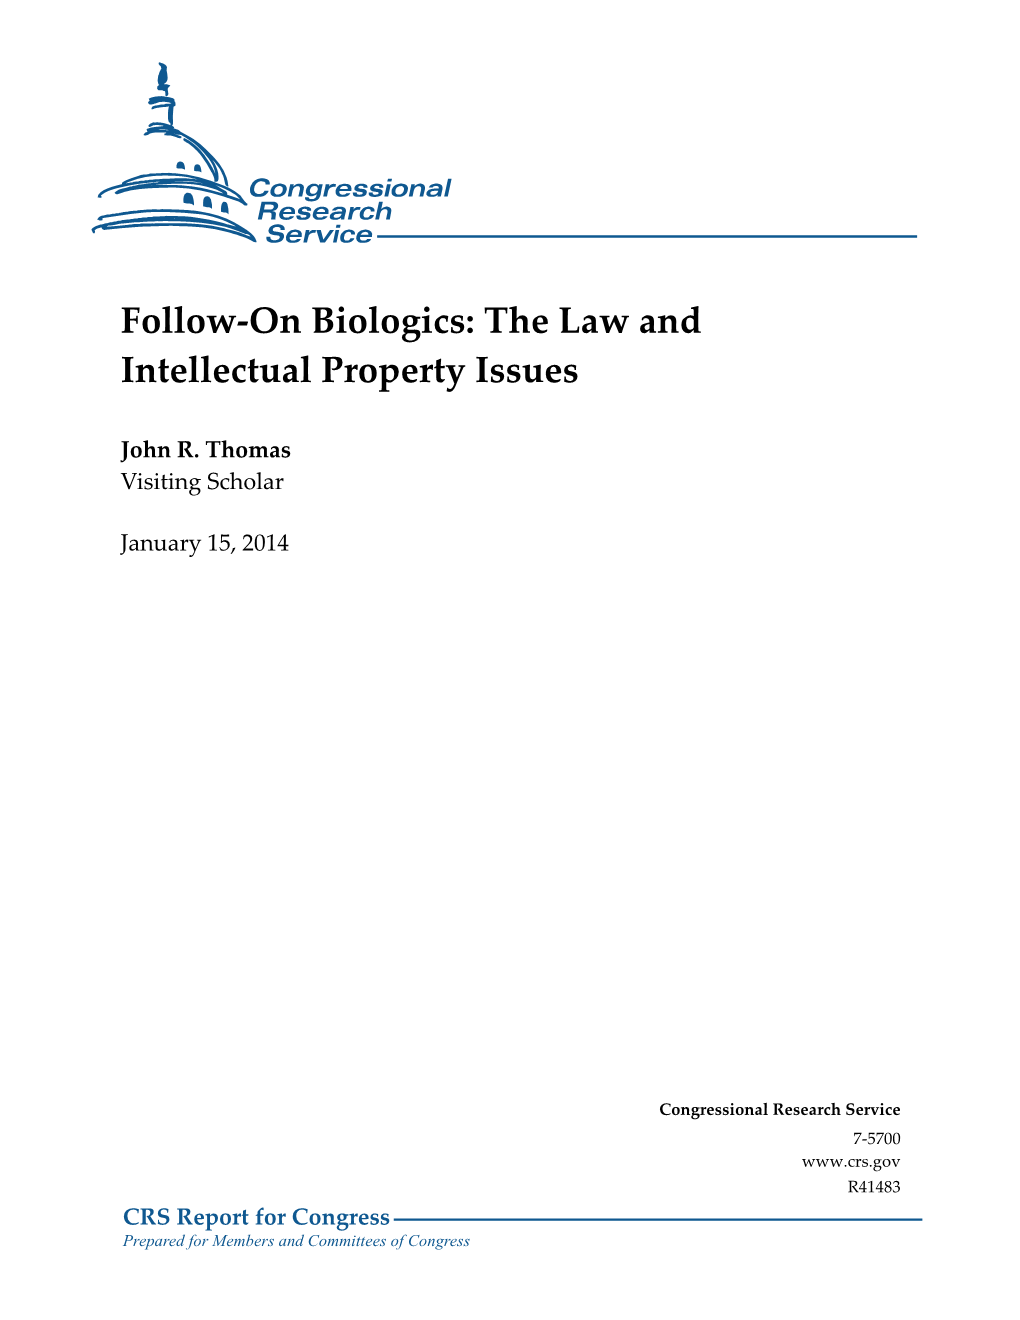 Follow-On Biologics: the Law and Intellectual Property Issues